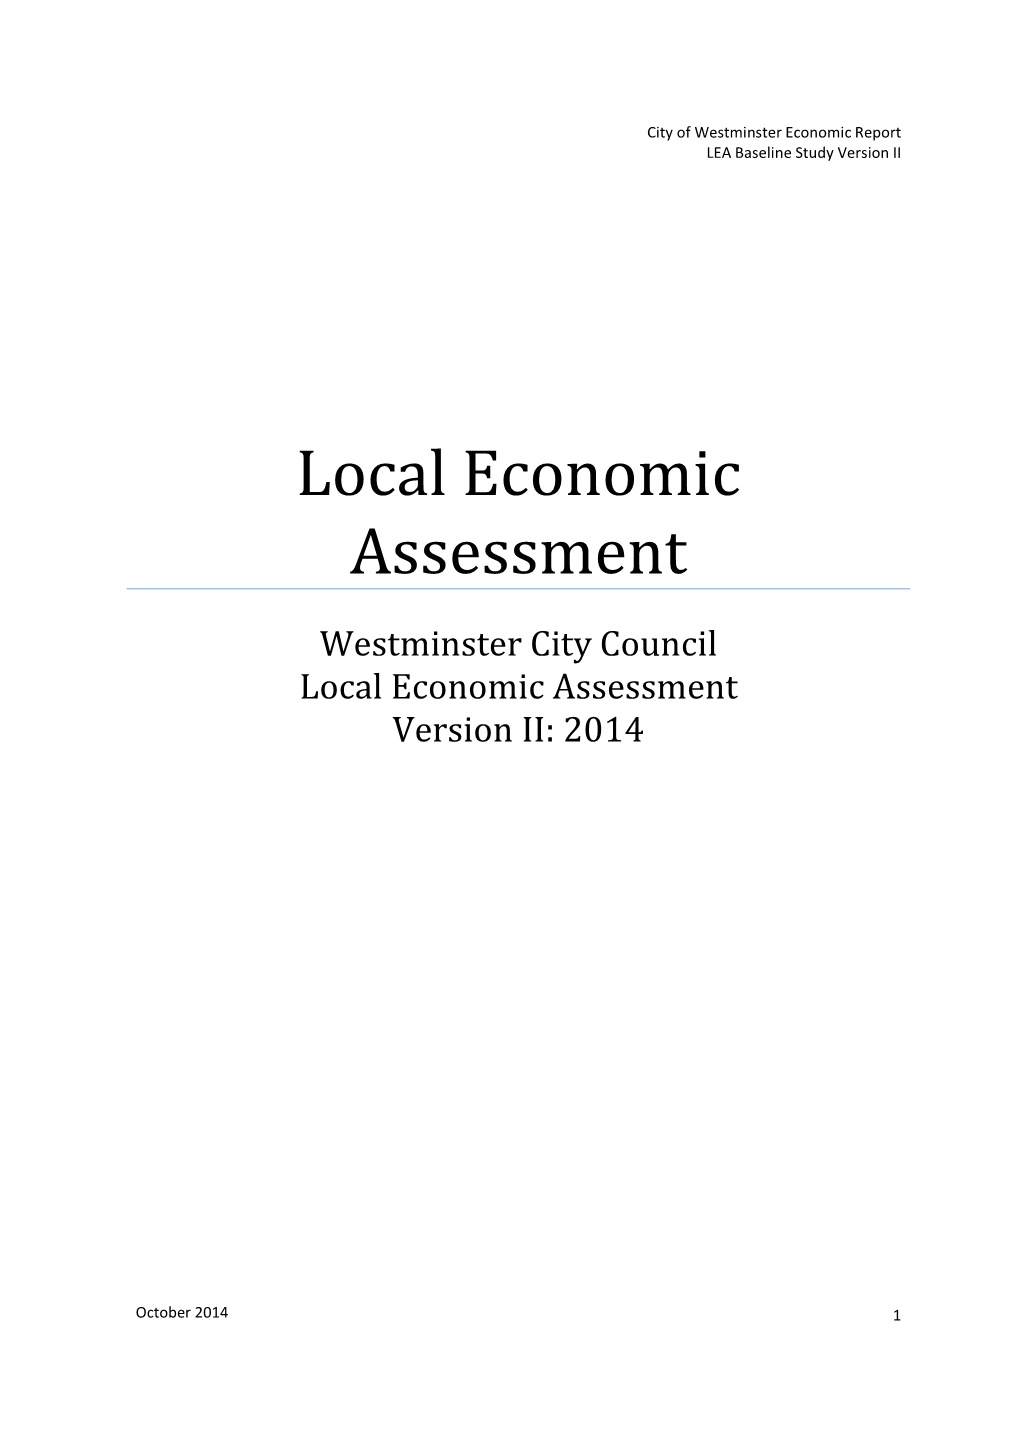 Westminster City Council Local Economic Assessment Version II: 2014